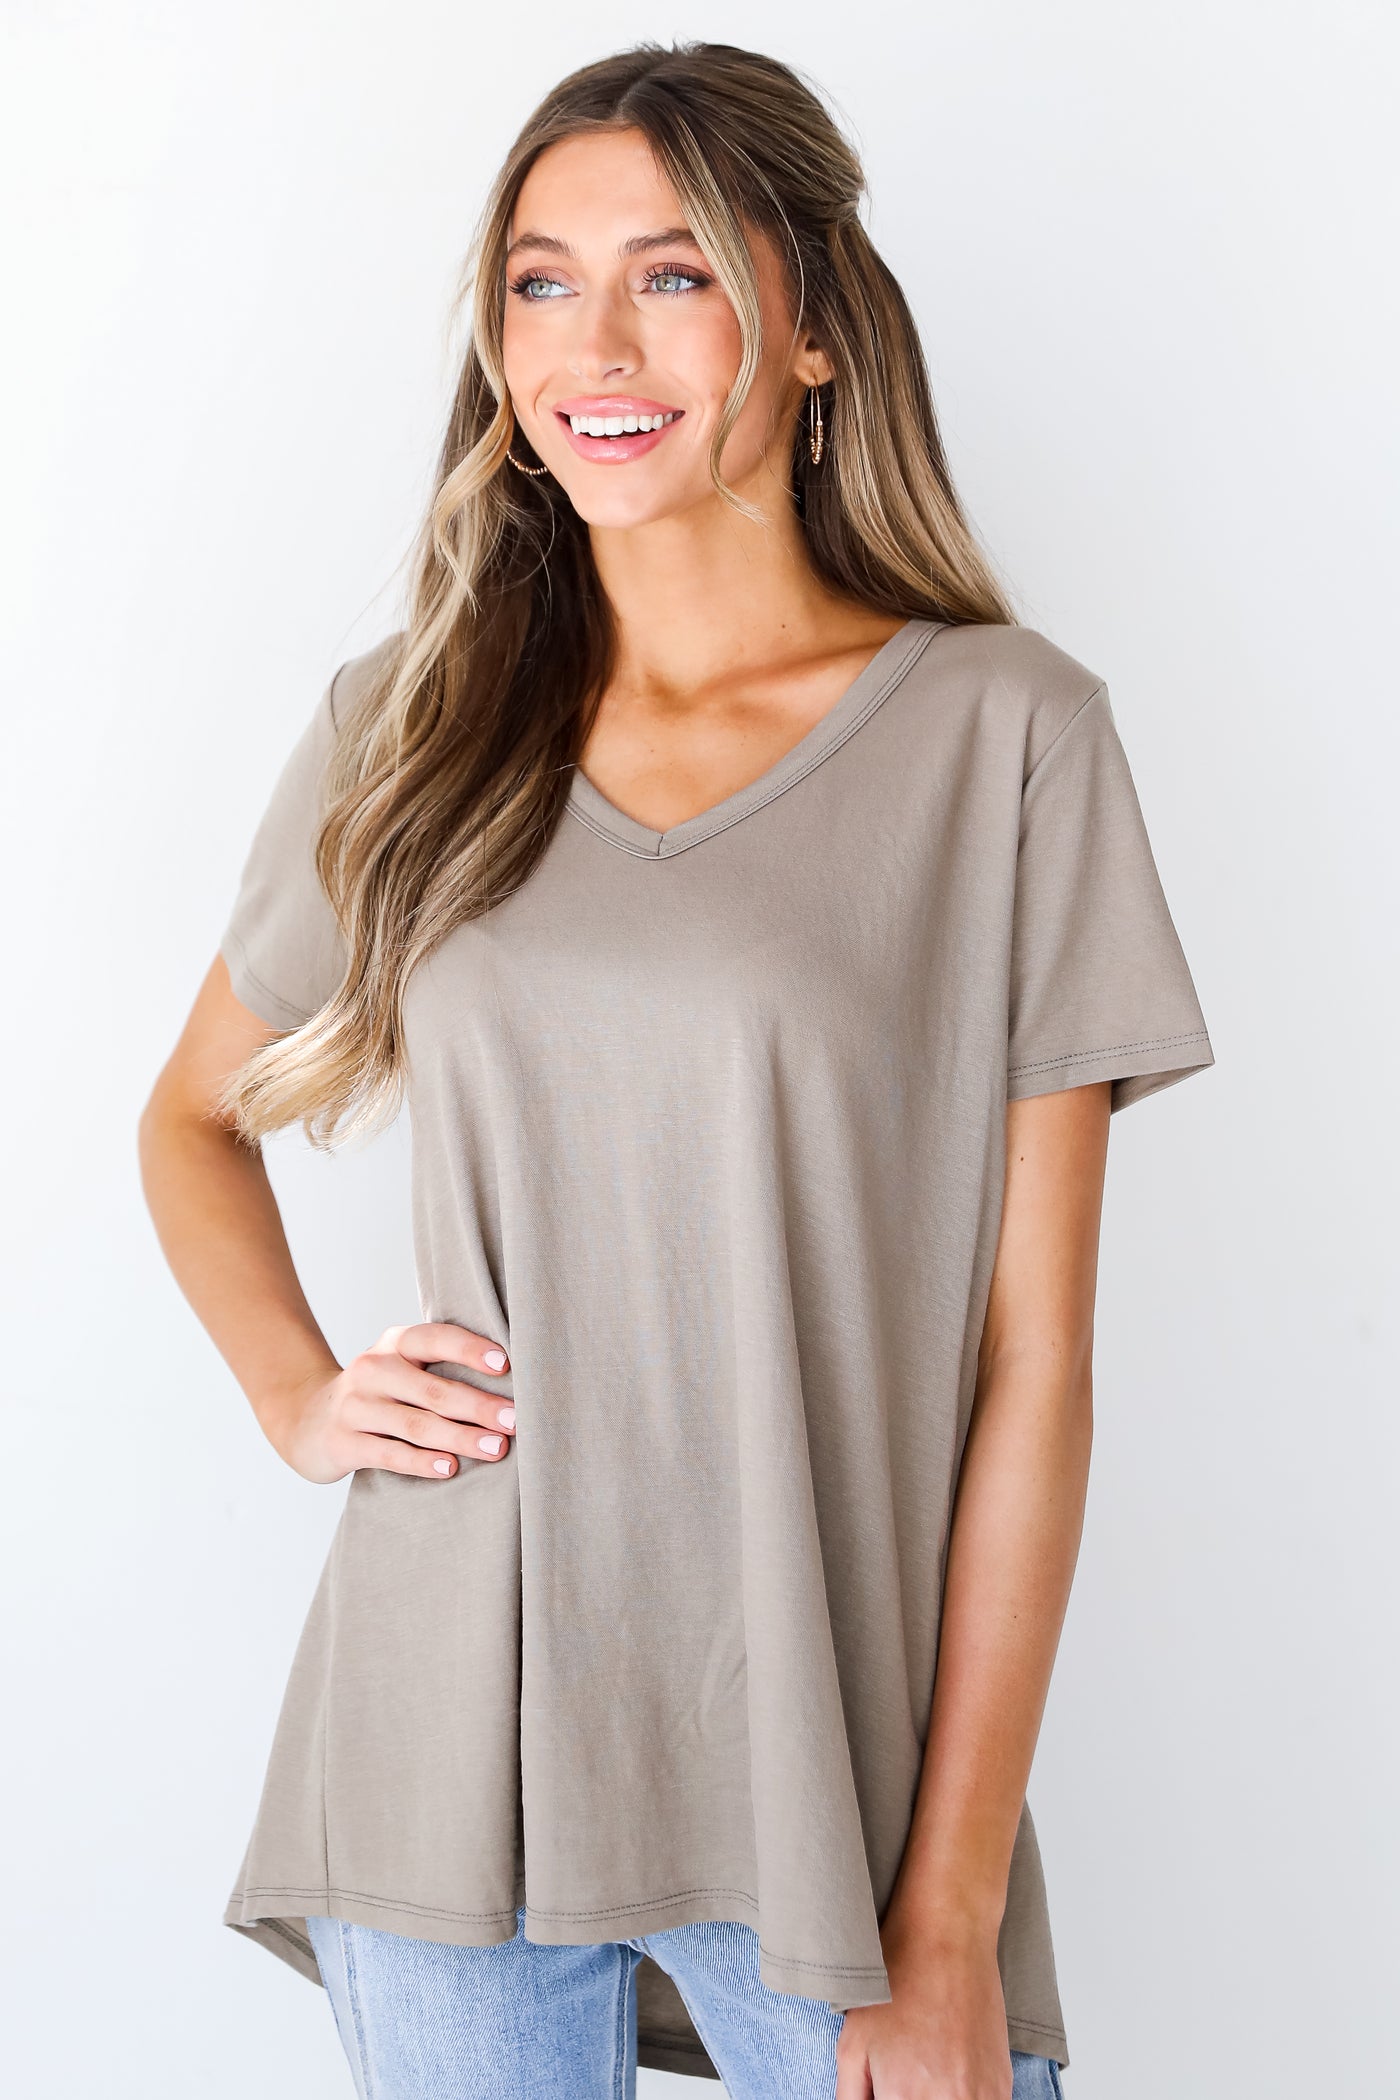 taupe Top on model